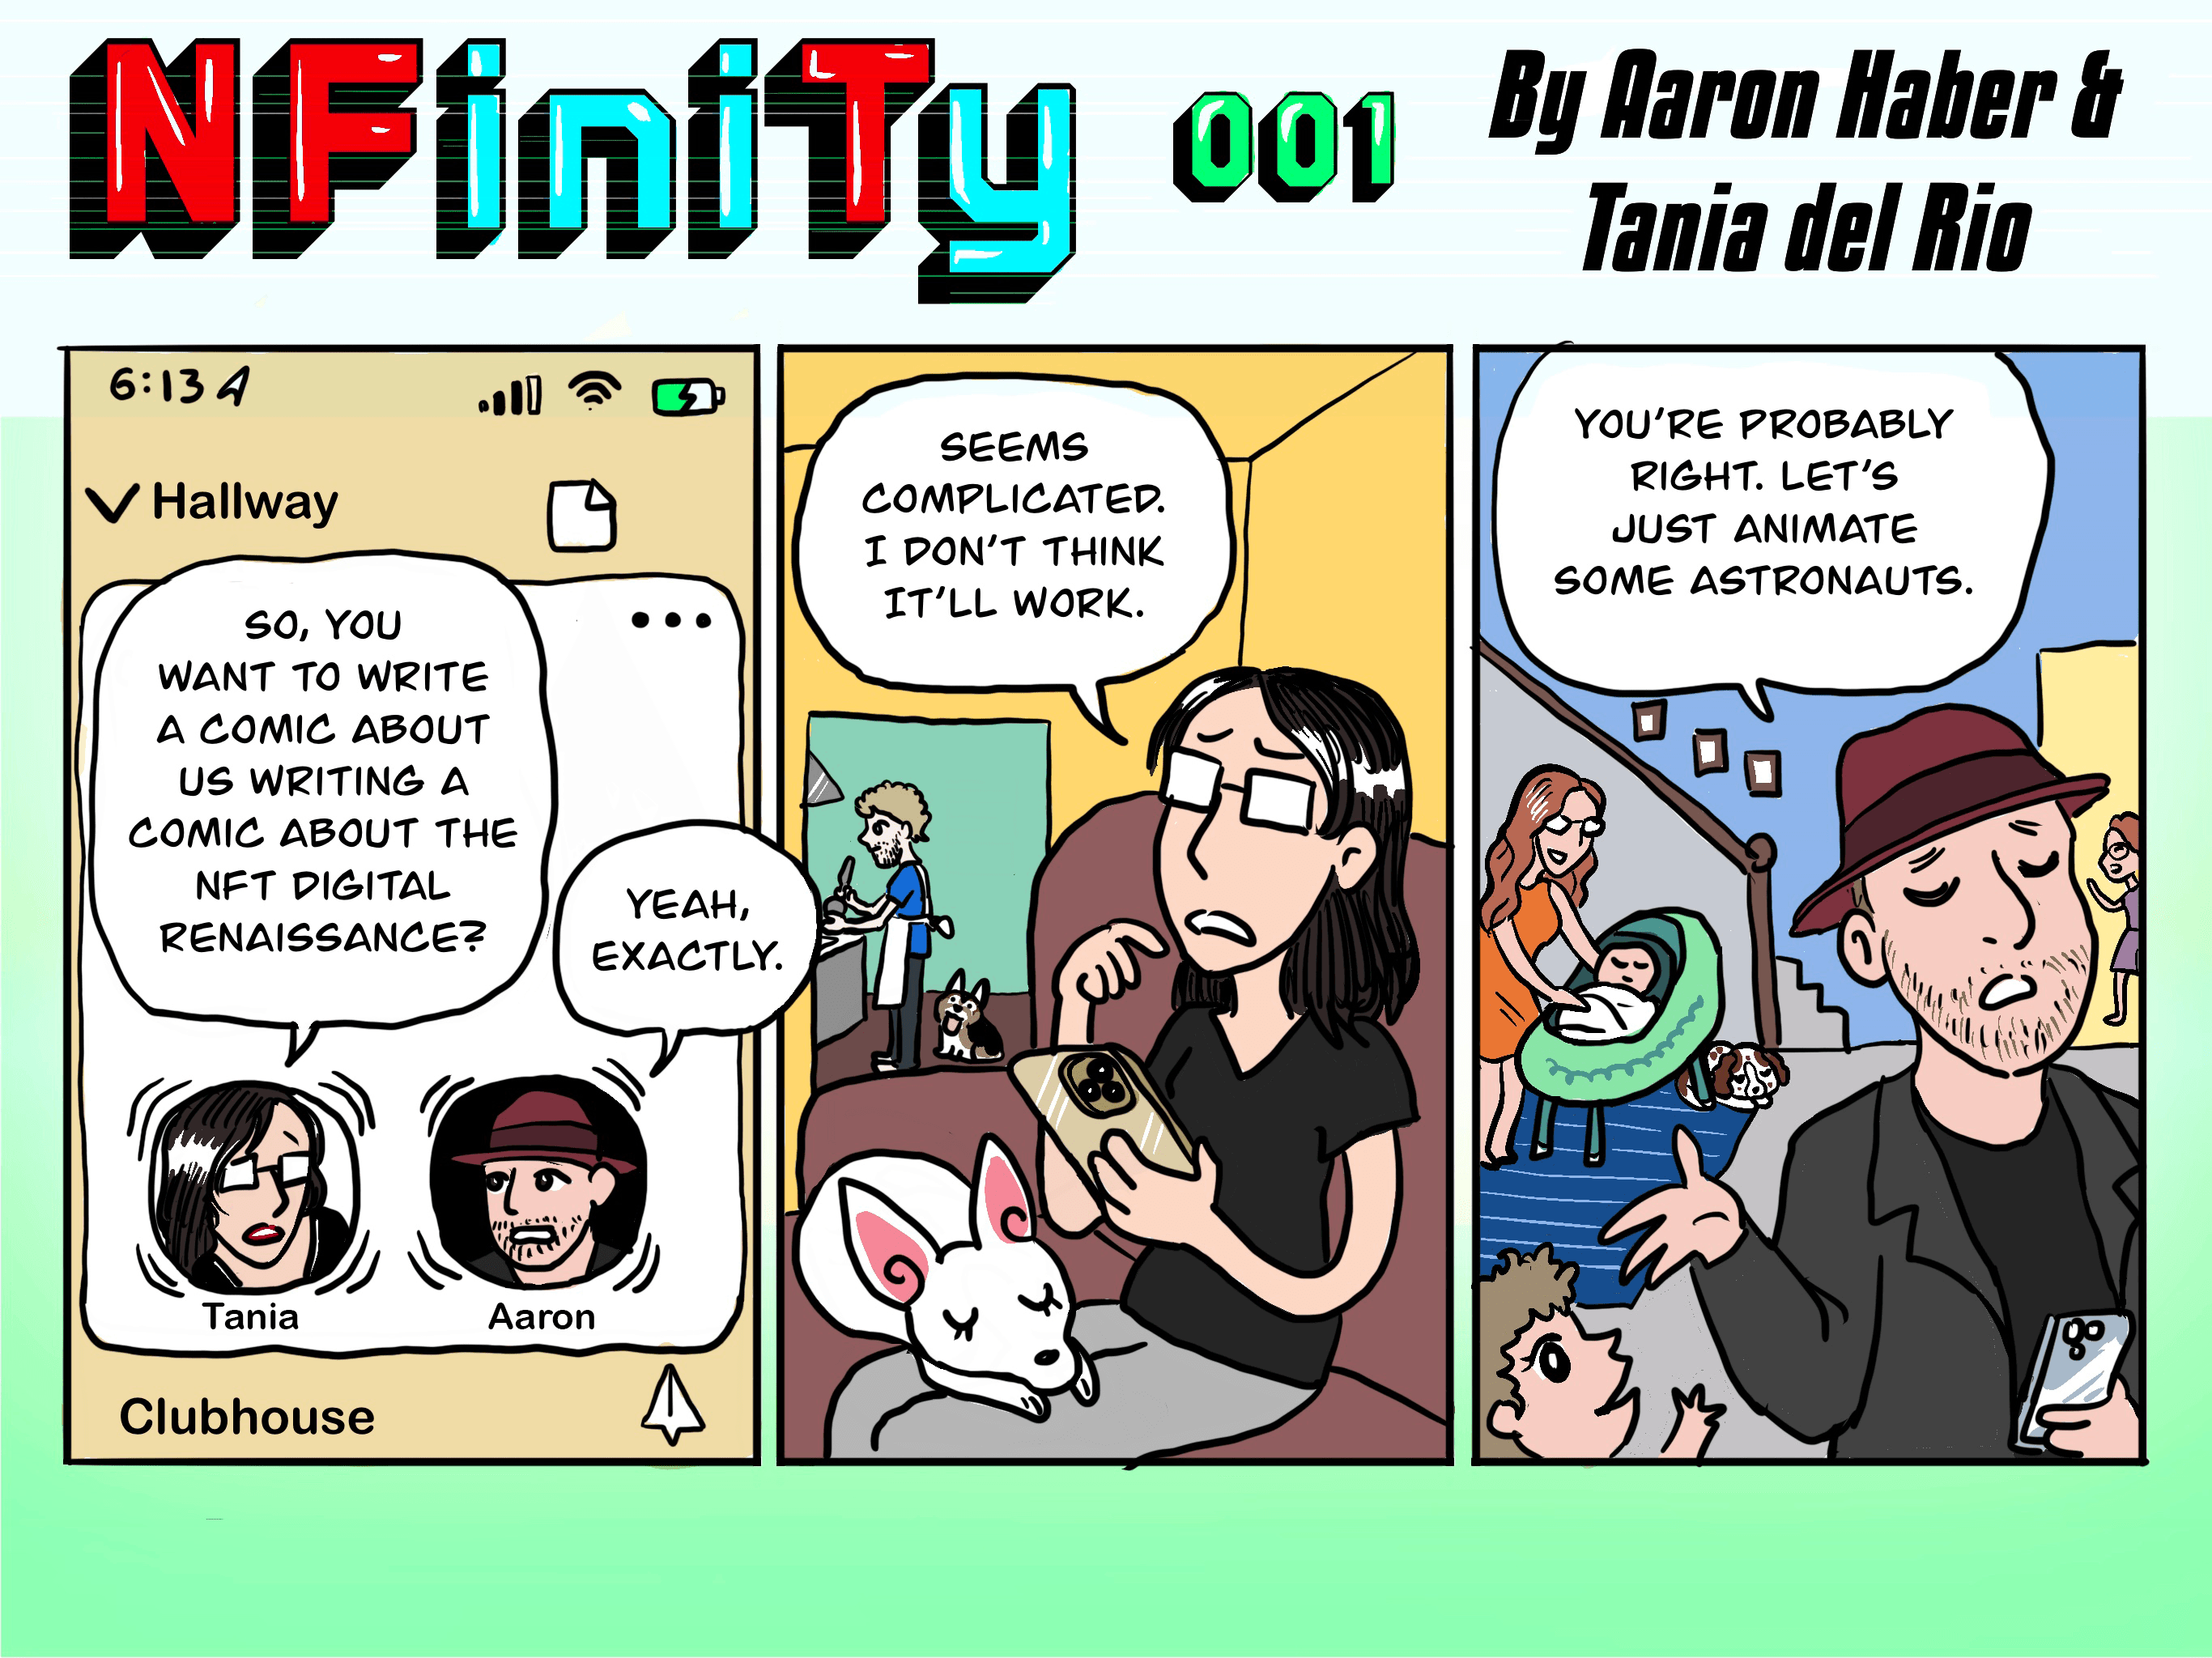 NFinity: The Comic Strip Series - Episode 001